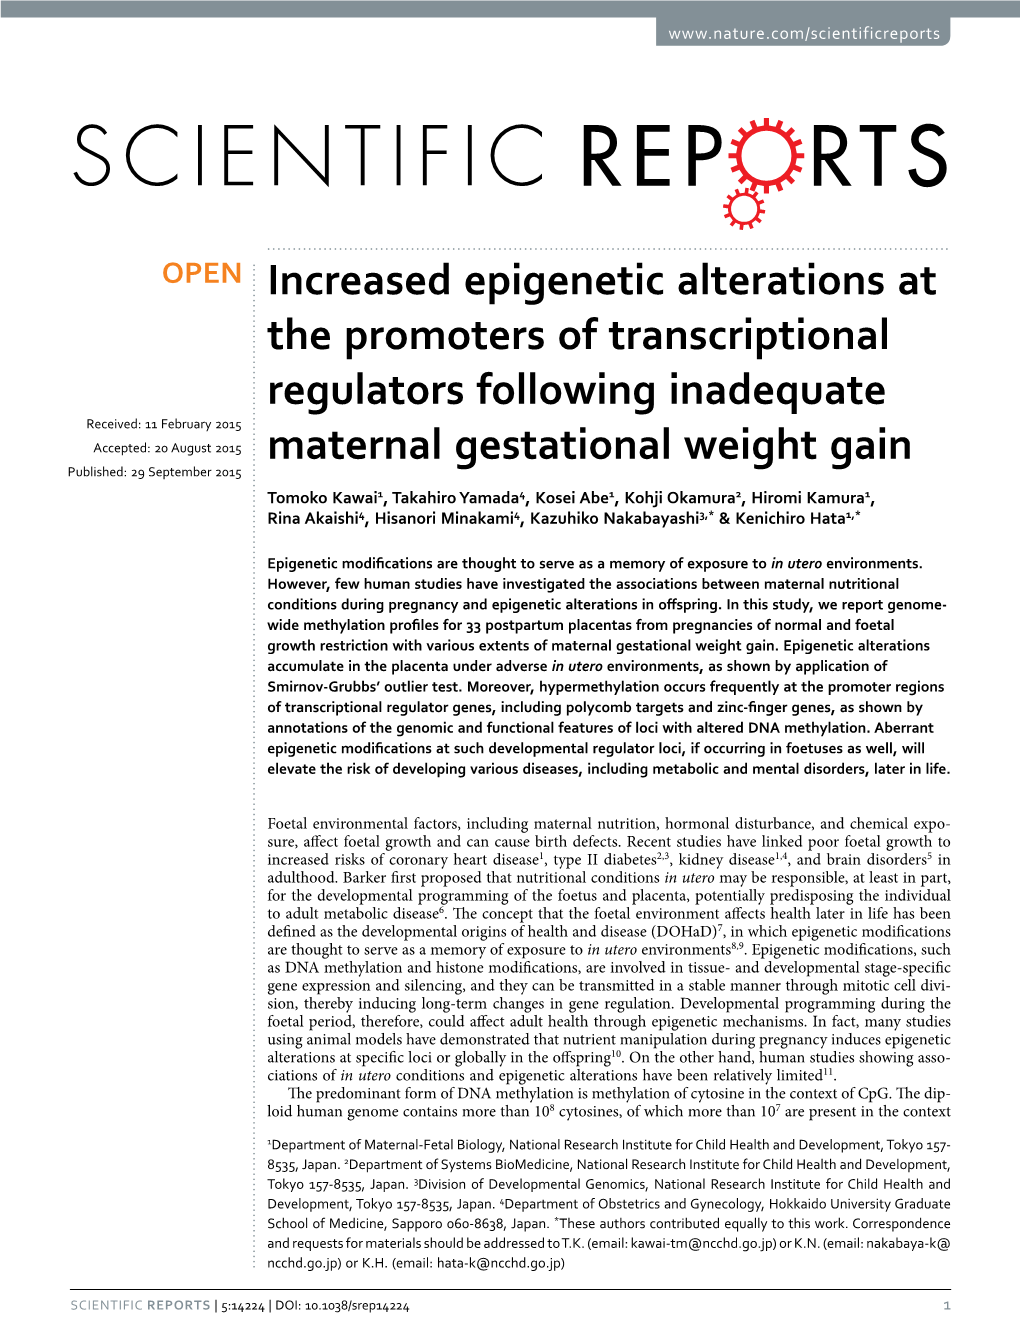 Increased Epigenetic Alterations at the Promoters of Transcriptional